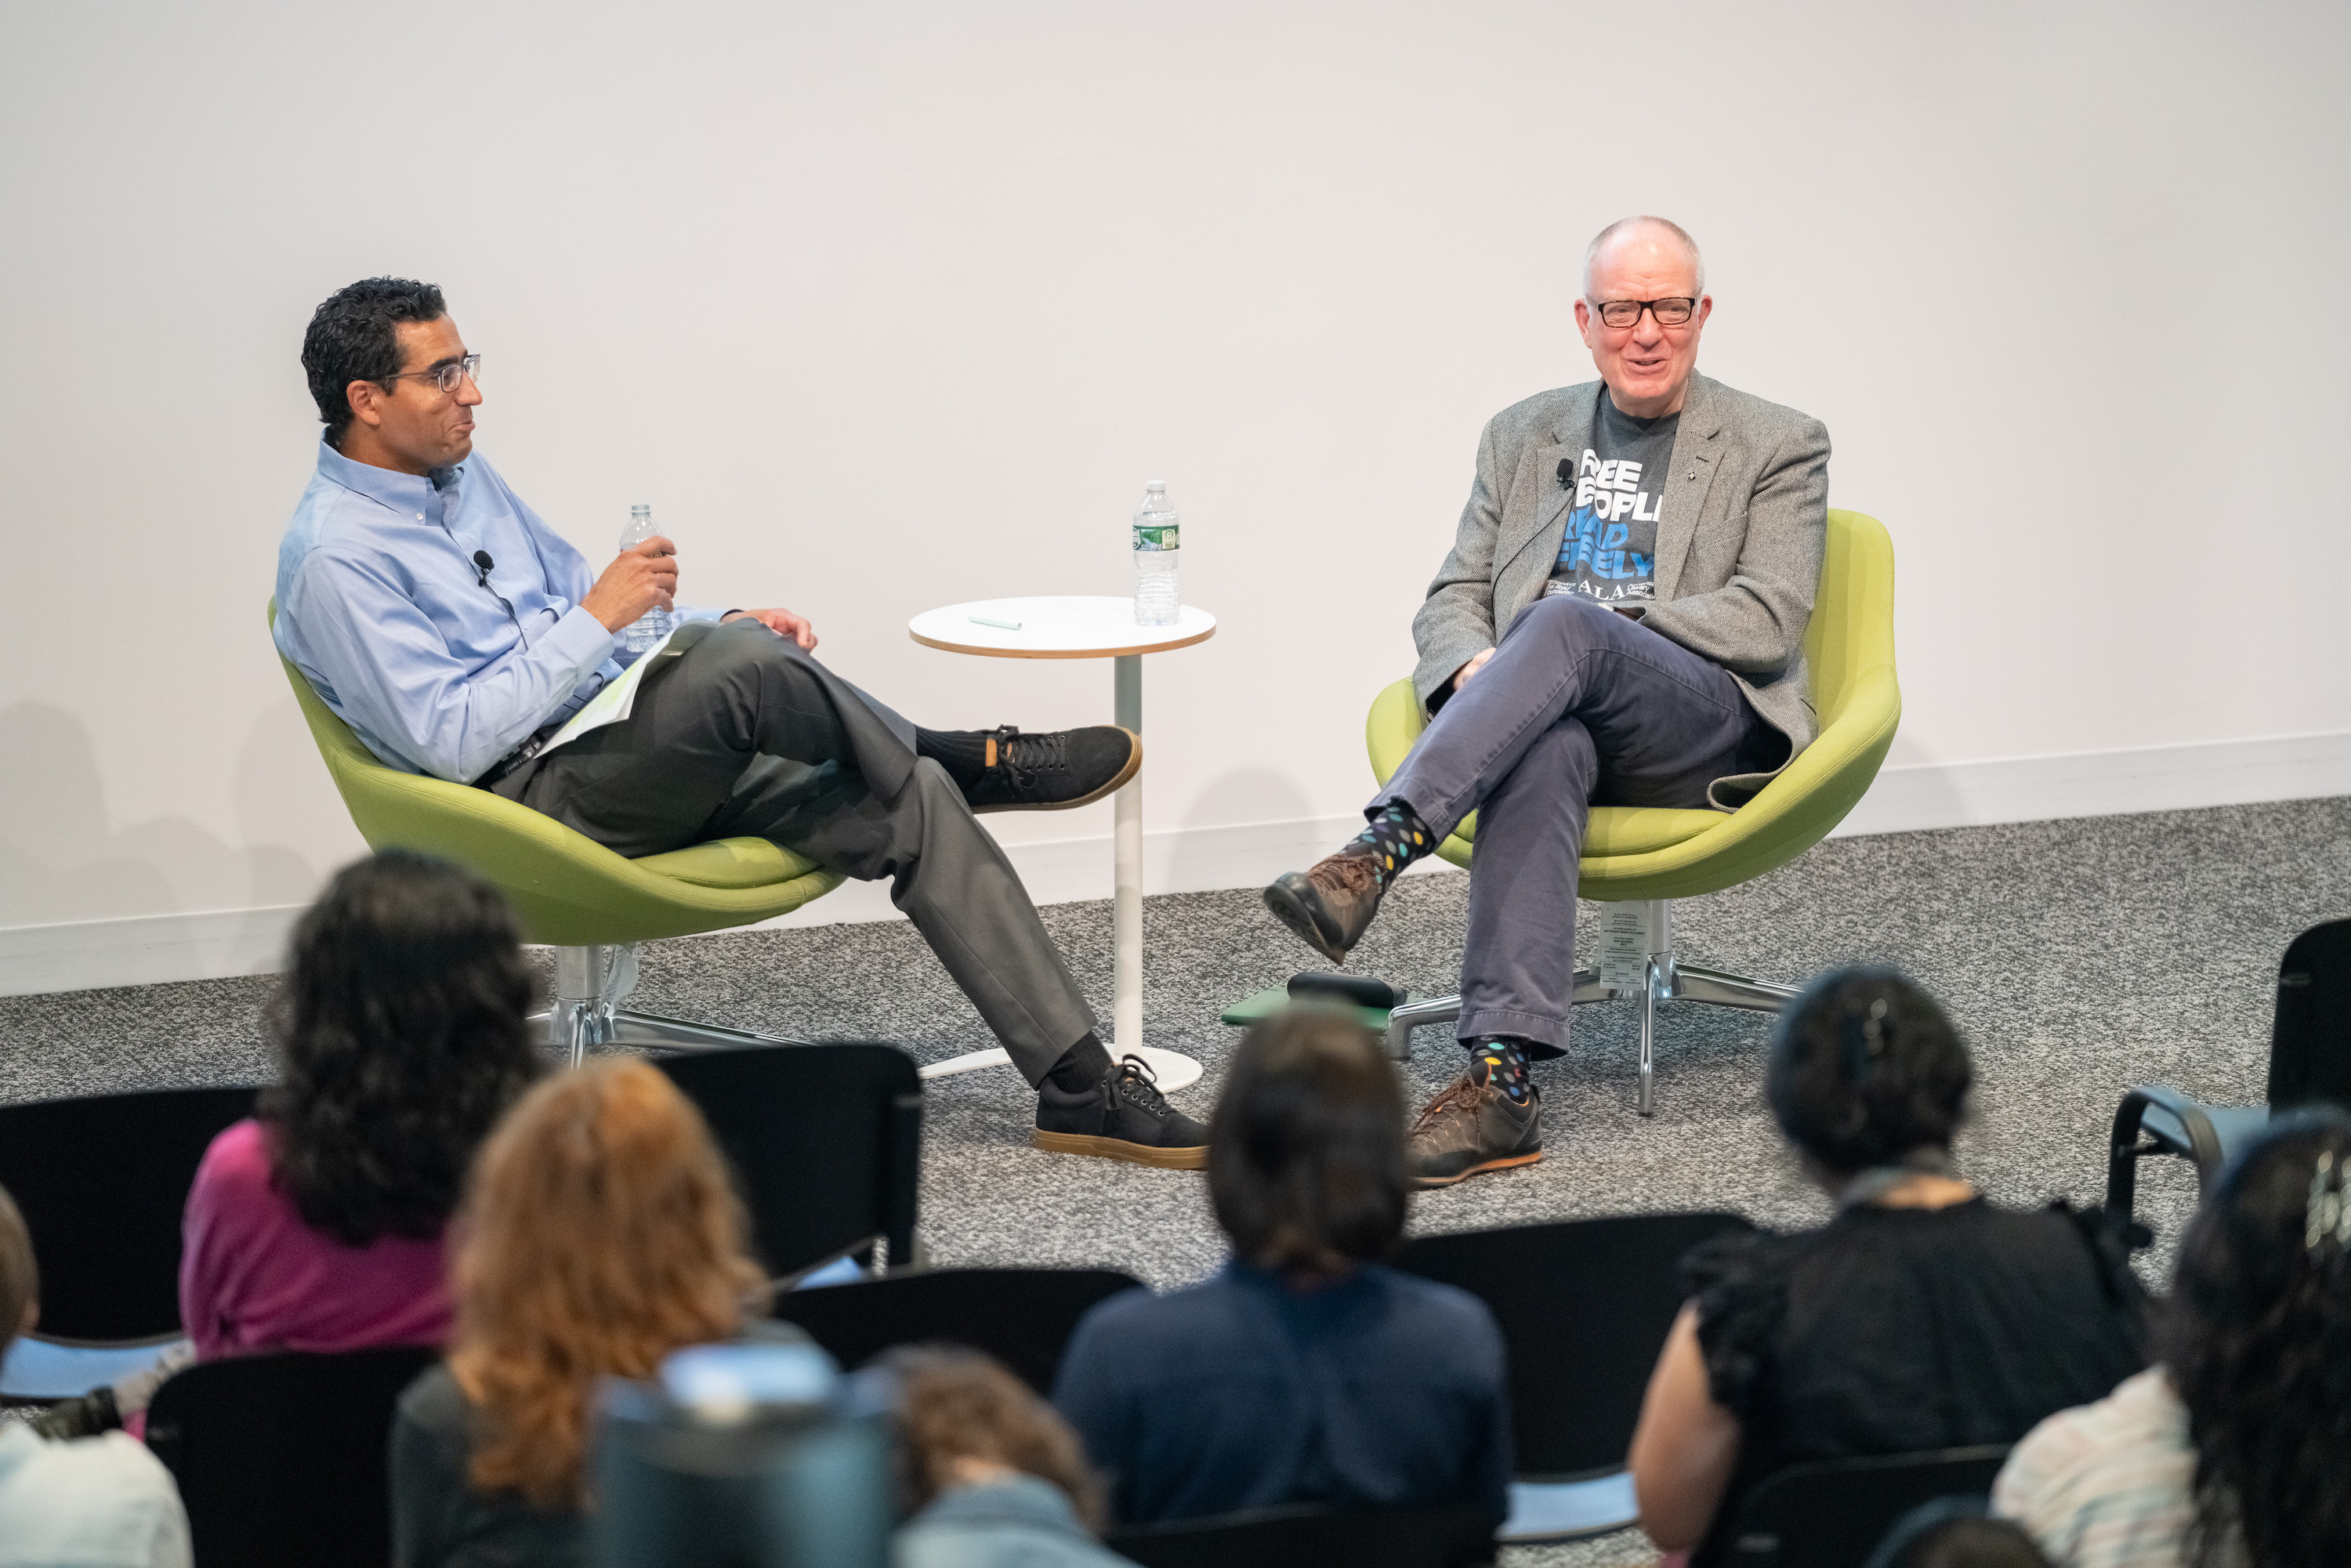 Professor Malick Ghachem (left) led a discussion with Richard Ovenden about the relevance of the research library to contemporary debates over academic freedom and free expression.